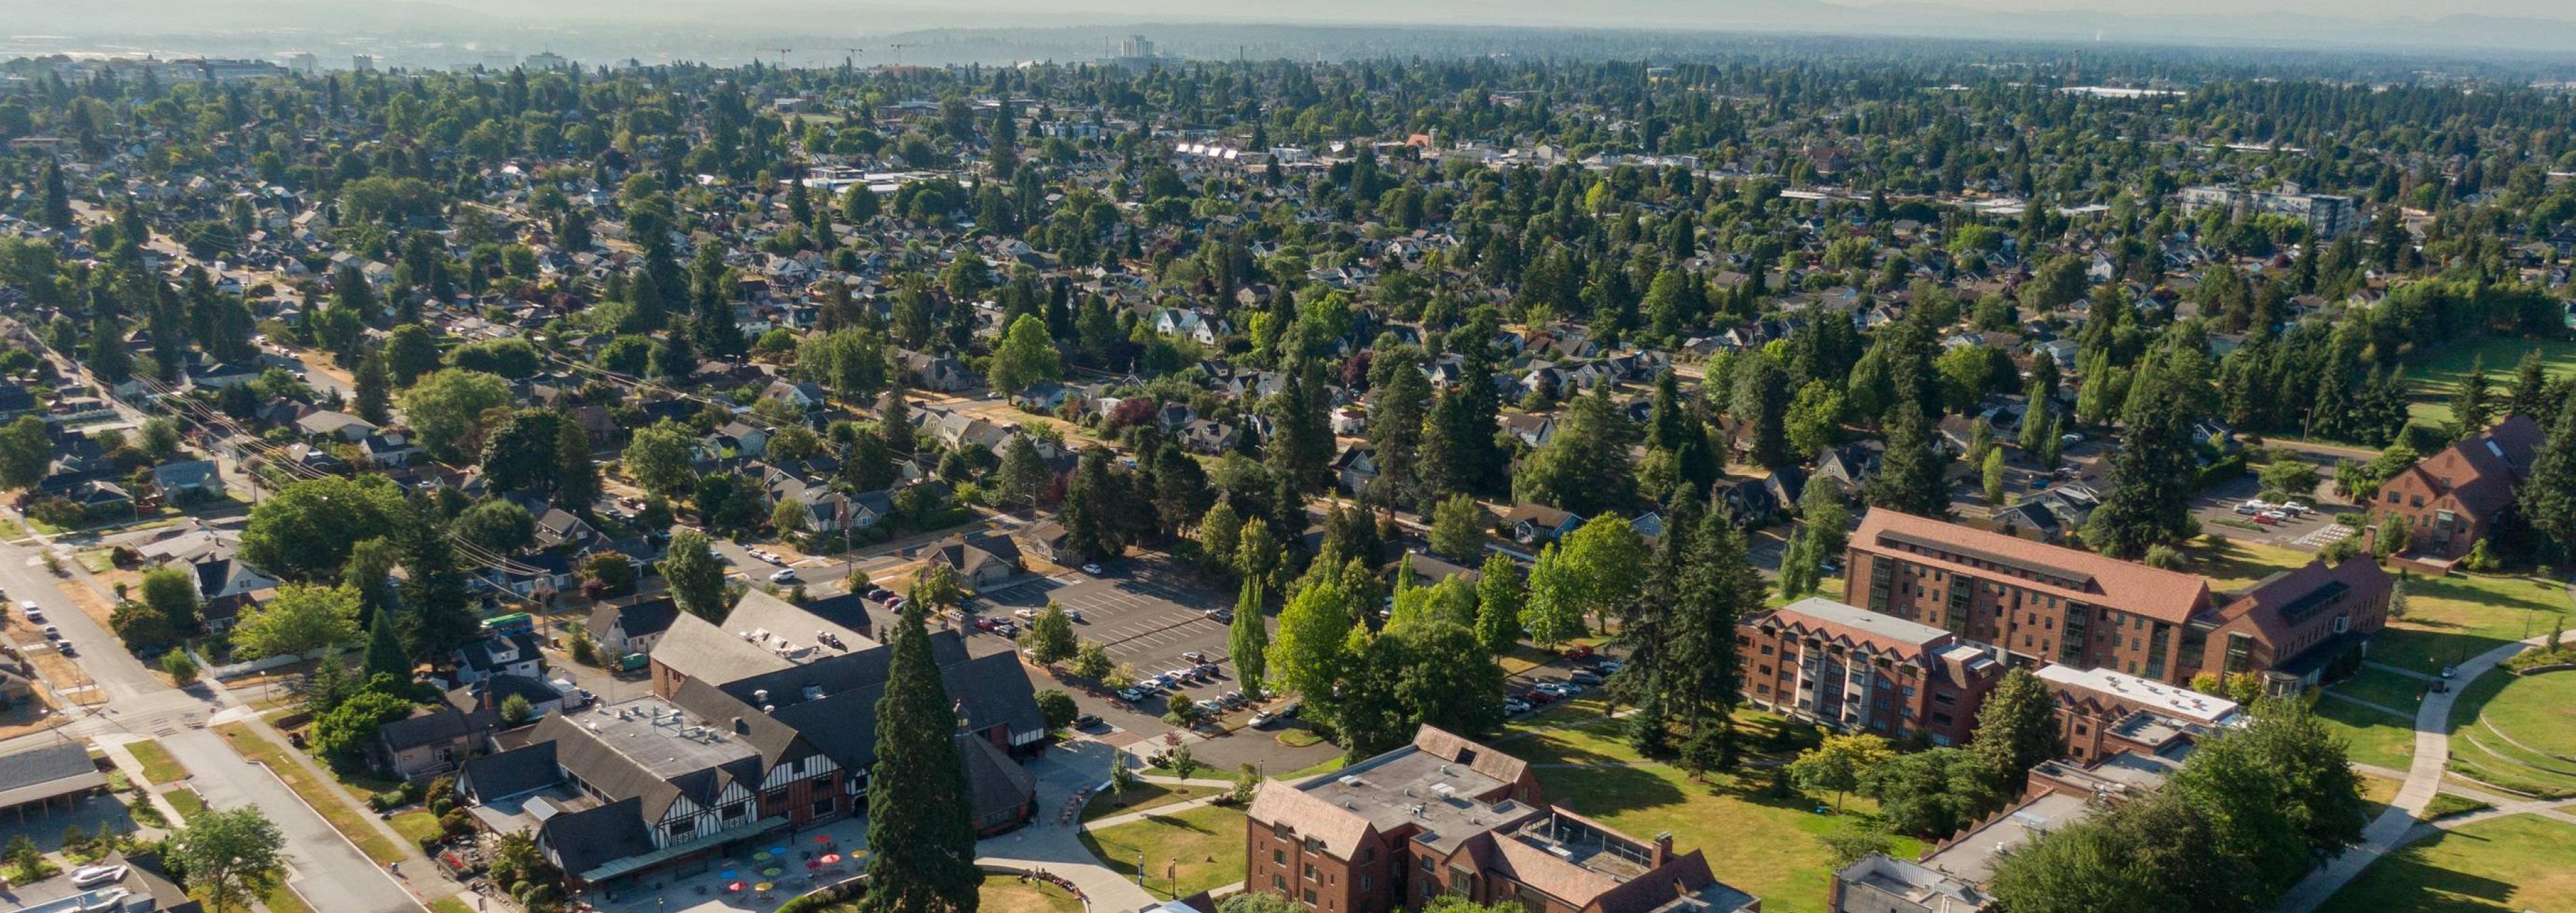 Aerial view of campus with Mount Rainier in the background